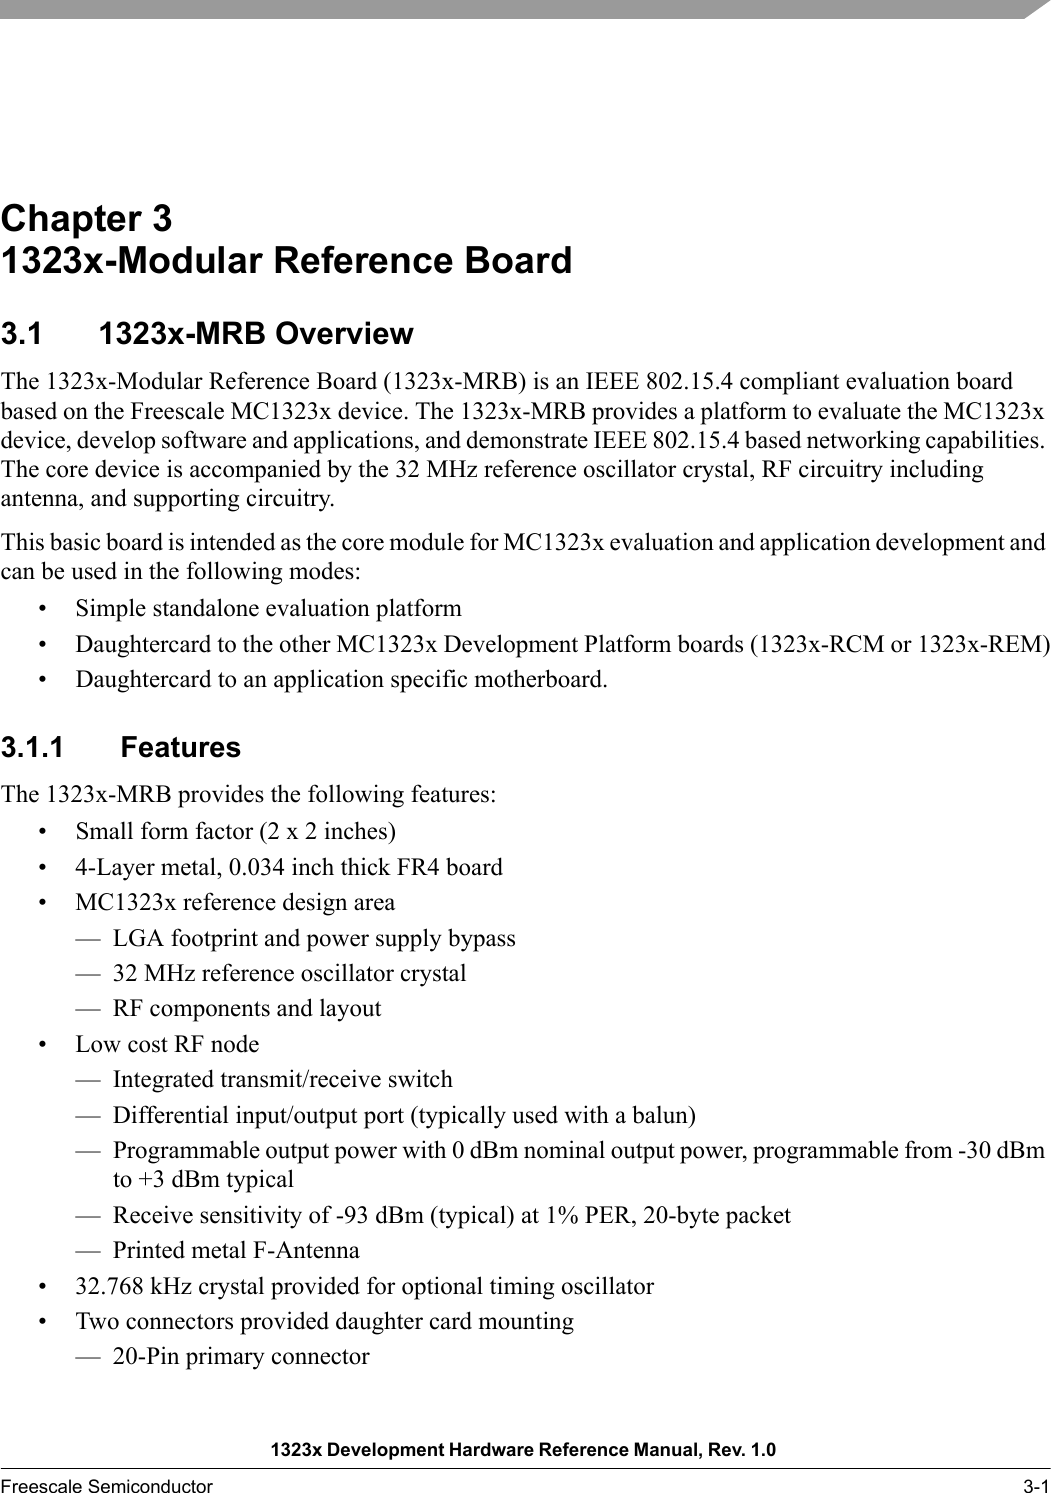 1323x Development Hardware Reference Manual, Rev. 1.0 Freescale Semiconductor 3-1Chapter 3  1323x-Modular Reference Board3.1 1323x-MRB OverviewThe 1323x-Modular Reference Board (1323x-MRB) is an IEEE 802.15.4 compliant evaluation board based on the Freescale MC1323x device. The 1323x-MRB provides a platform to evaluate the MC1323x device, develop software and applications, and demonstrate IEEE 802.15.4 based networking capabilities. The core device is accompanied by the 32 MHz reference oscillator crystal, RF circuitry including antenna, and supporting circuitry. This basic board is intended as the core module for MC1323x evaluation and application development and can be used in the following modes:• Simple standalone evaluation platform• Daughtercard to the other MC1323x Development Platform boards (1323x-RCM or 1323x-REM)• Daughtercard to an application specific motherboard.3.1.1 FeaturesThe 1323x-MRB provides the following features:• Small form factor (2 x 2 inches)• 4-Layer metal, 0.034 inch thick FR4 board• MC1323x reference design area— LGA footprint and power supply bypass— 32 MHz reference oscillator crystal— RF components and layout• Low cost RF node— Integrated transmit/receive switch— Differential input/output port (typically used with a balun)— Programmable output power with 0 dBm nominal output power, programmable from -30 dBm to +3 dBm typical— Receive sensitivity of -93 dBm (typical) at 1% PER, 20-byte packet— Printed metal F-Antenna• 32.768 kHz crystal provided for optional timing oscillator• Two connectors provided daughter card mounting— 20-Pin primary connector